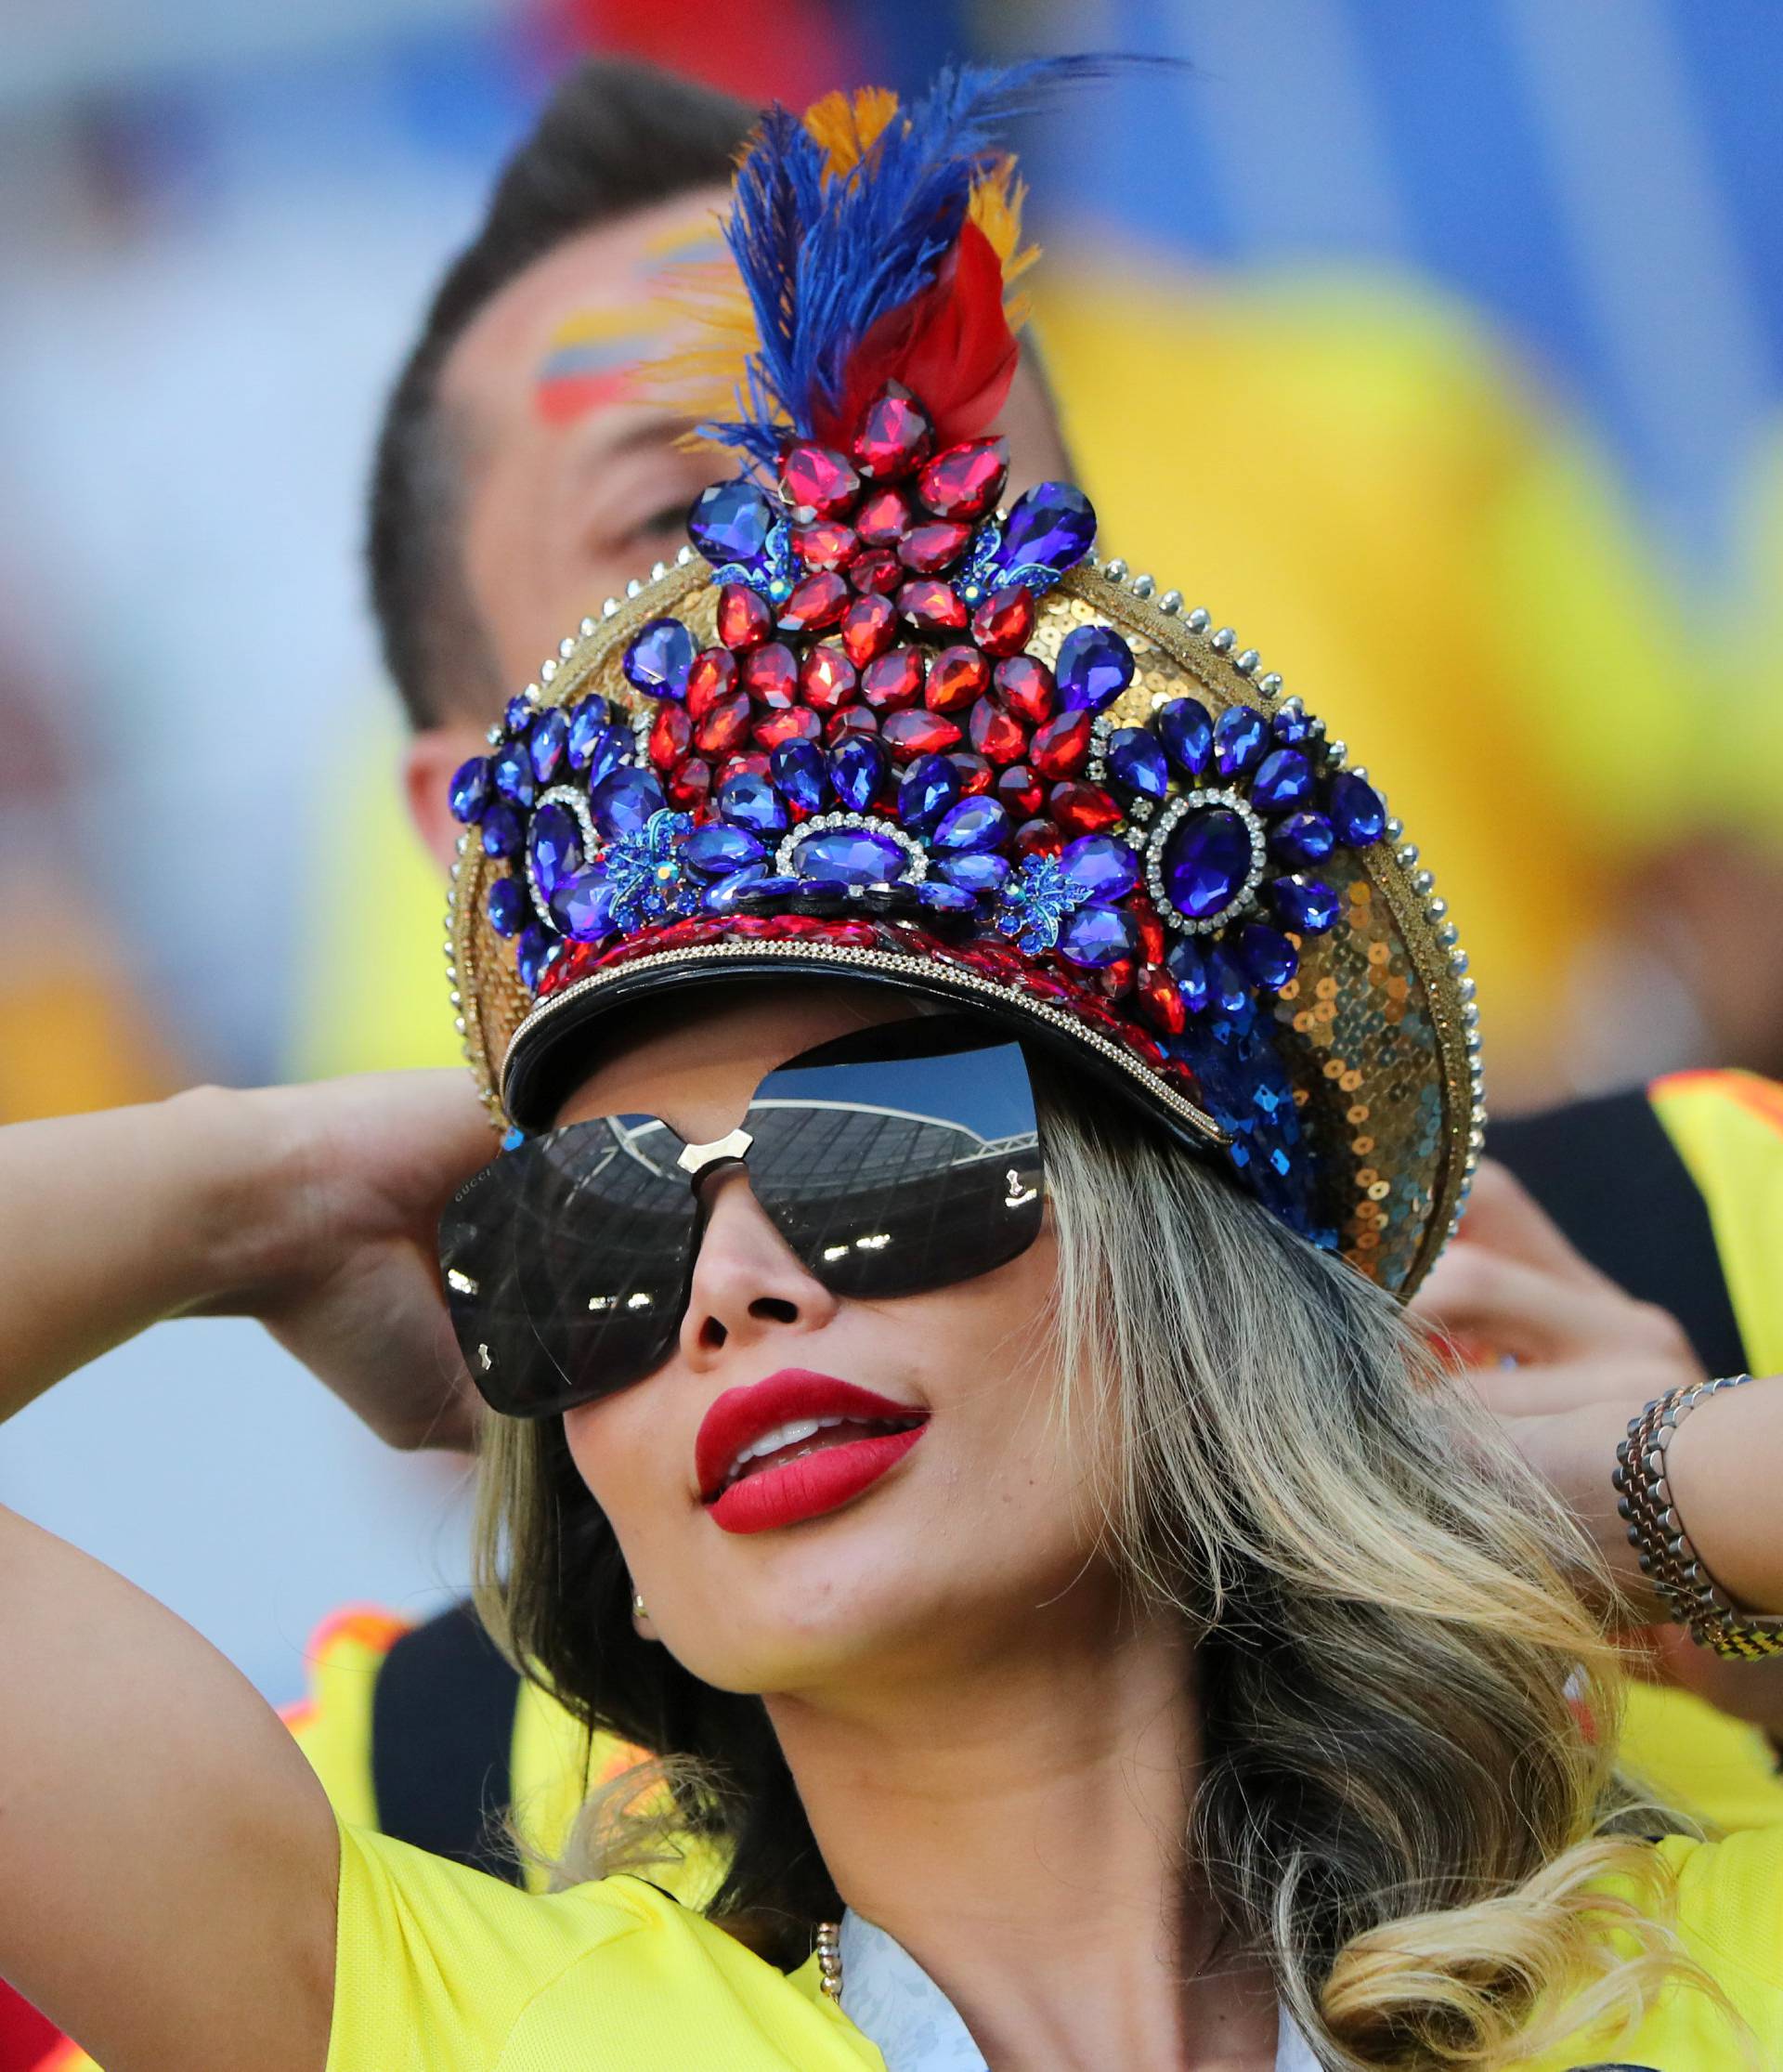 World Cup - Group H - Senegal vs Colombia